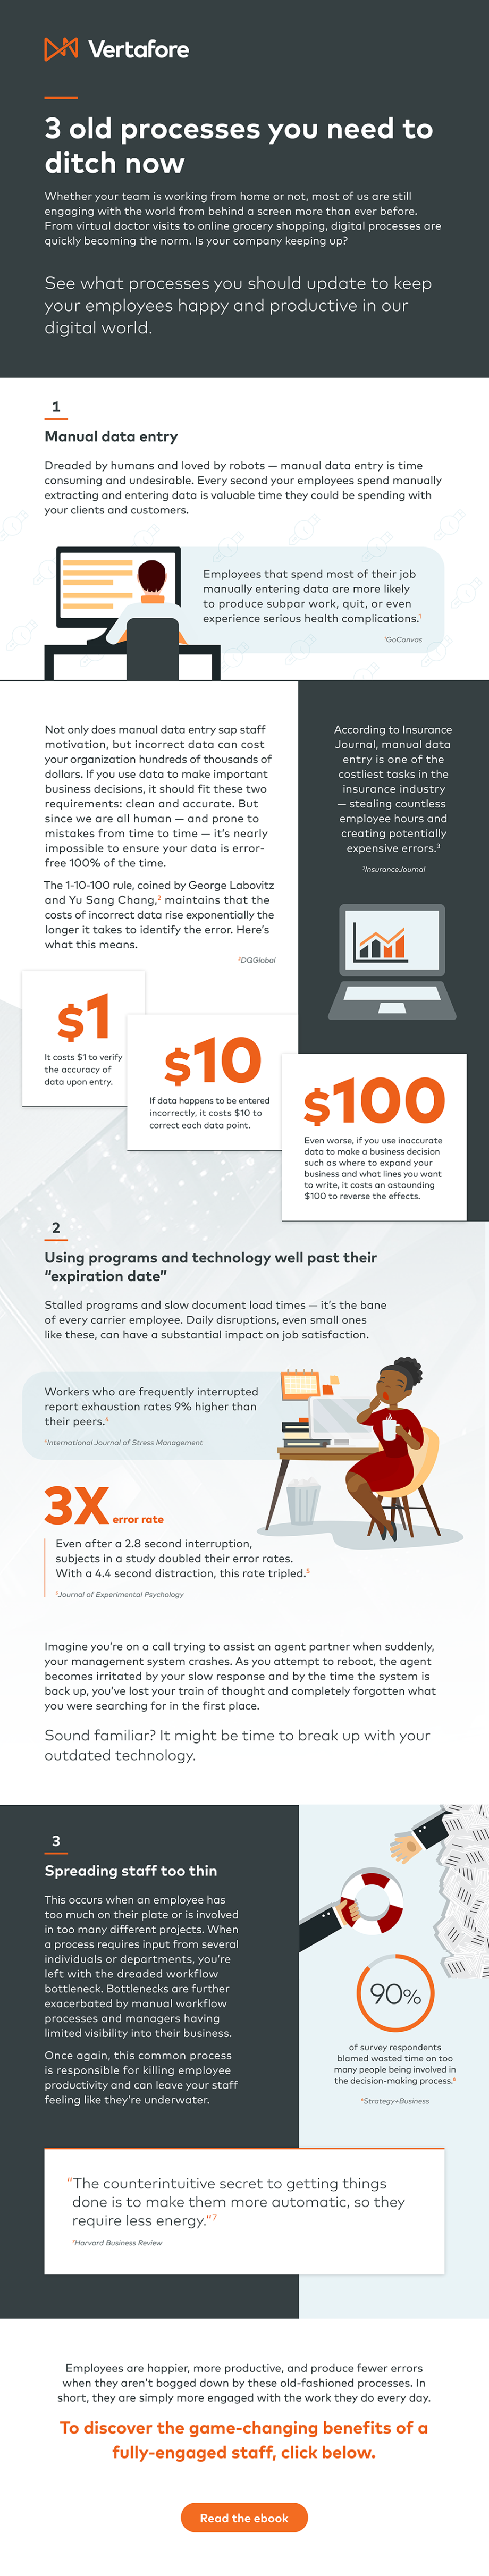 3 Old Processes You Need to Ditch Now - Infographic